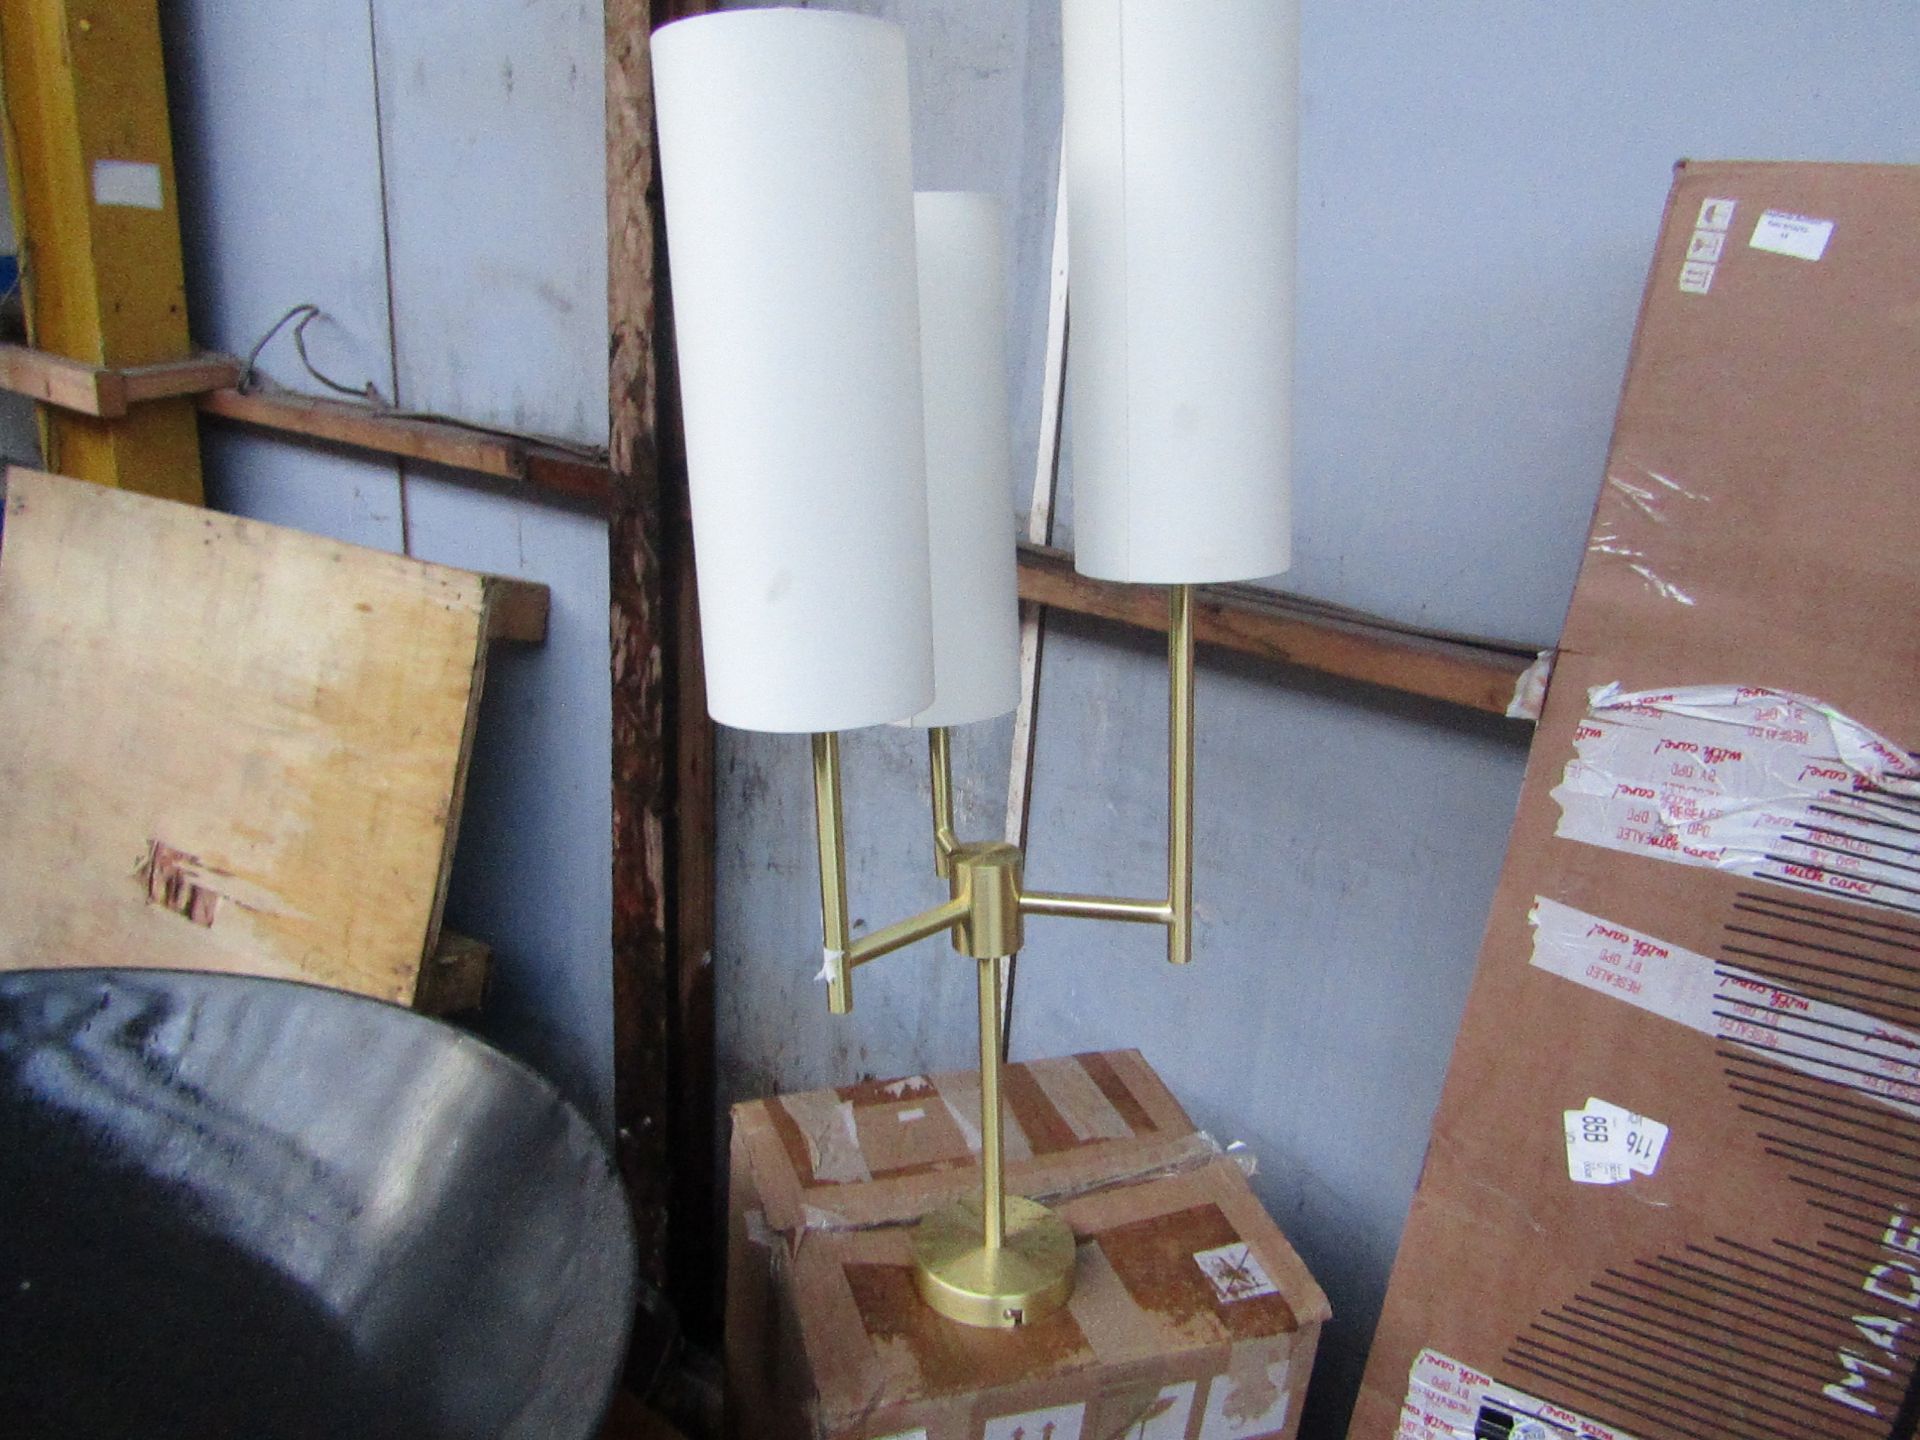 | 1X | MADE.COM LANCE CHANDELIER PENDANT LIGHT, BRUSHED BRASS & WHITE | LOOKS IN GOOD CONDITION &